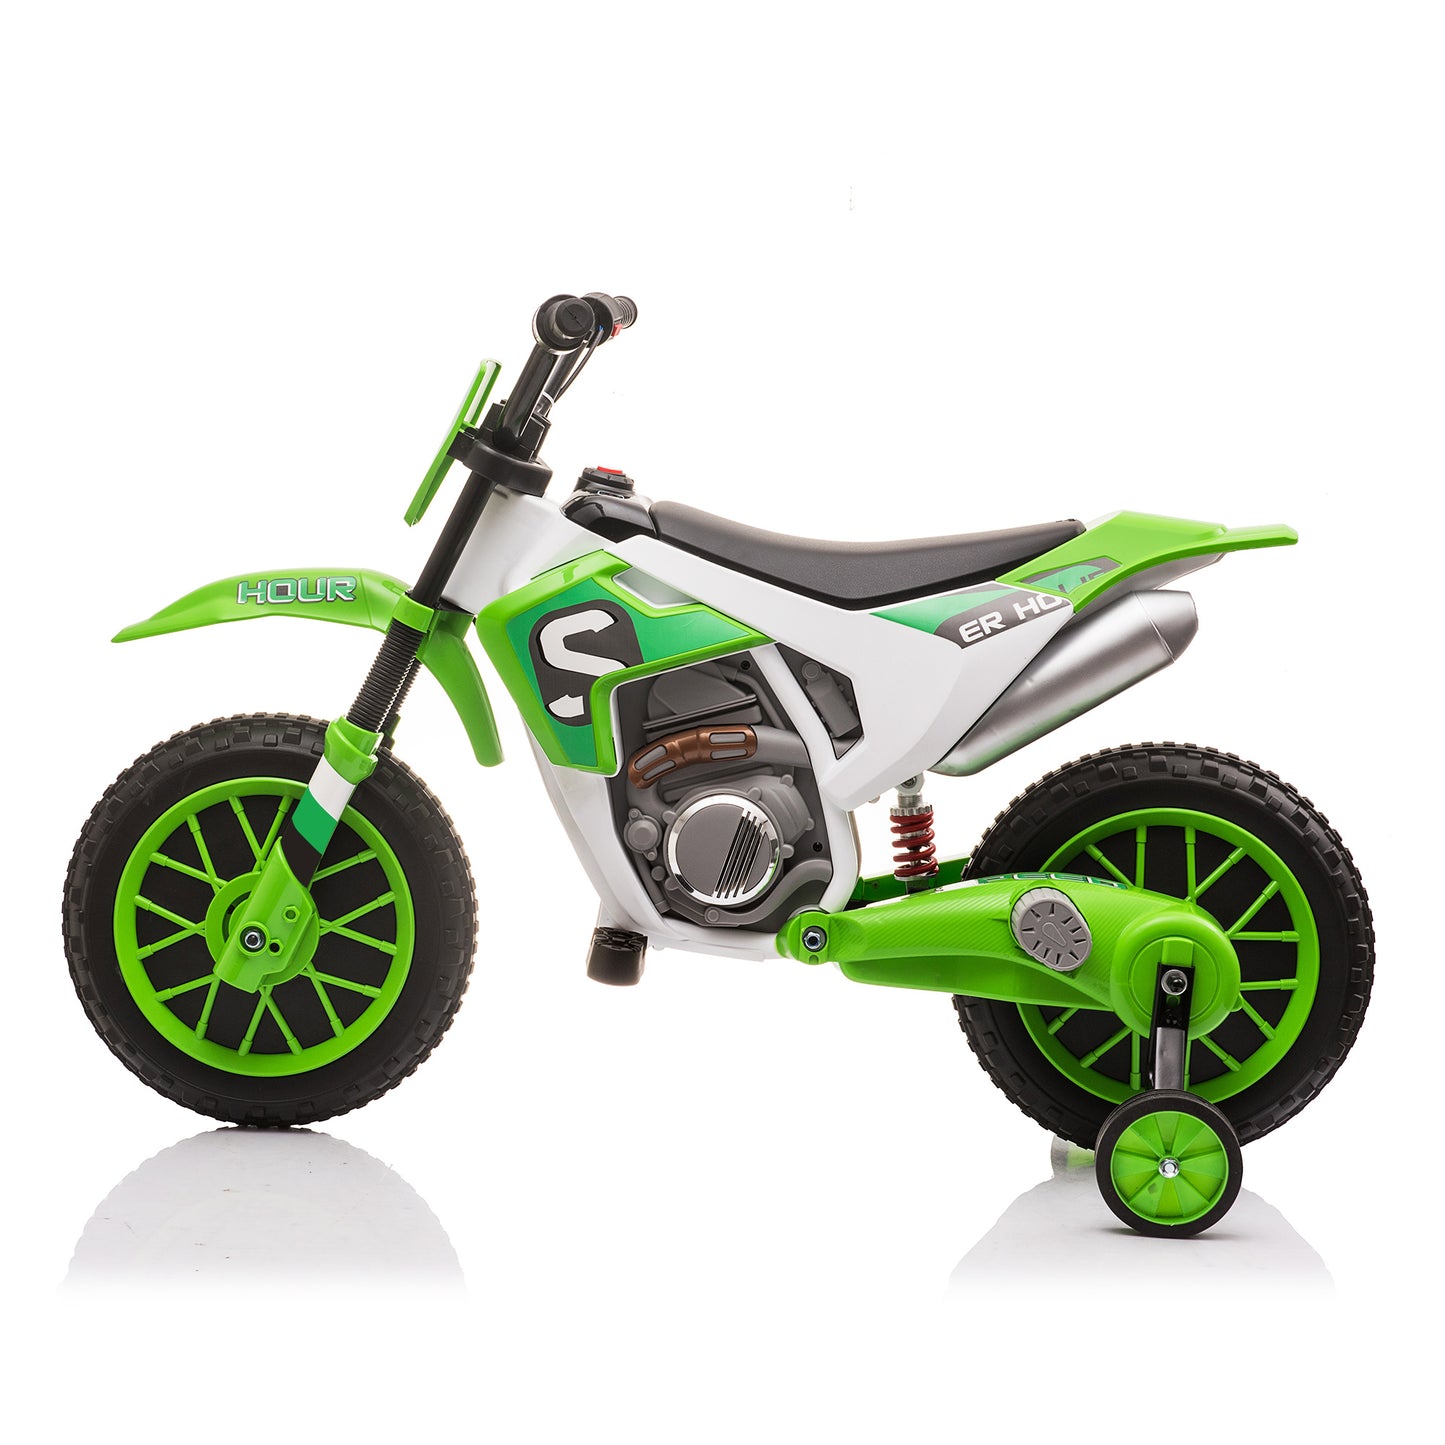 12V Kids Ride on Toy Motorcycle, Electric Motor Toy Bike with Training Wheels for Kids 3-6, Green